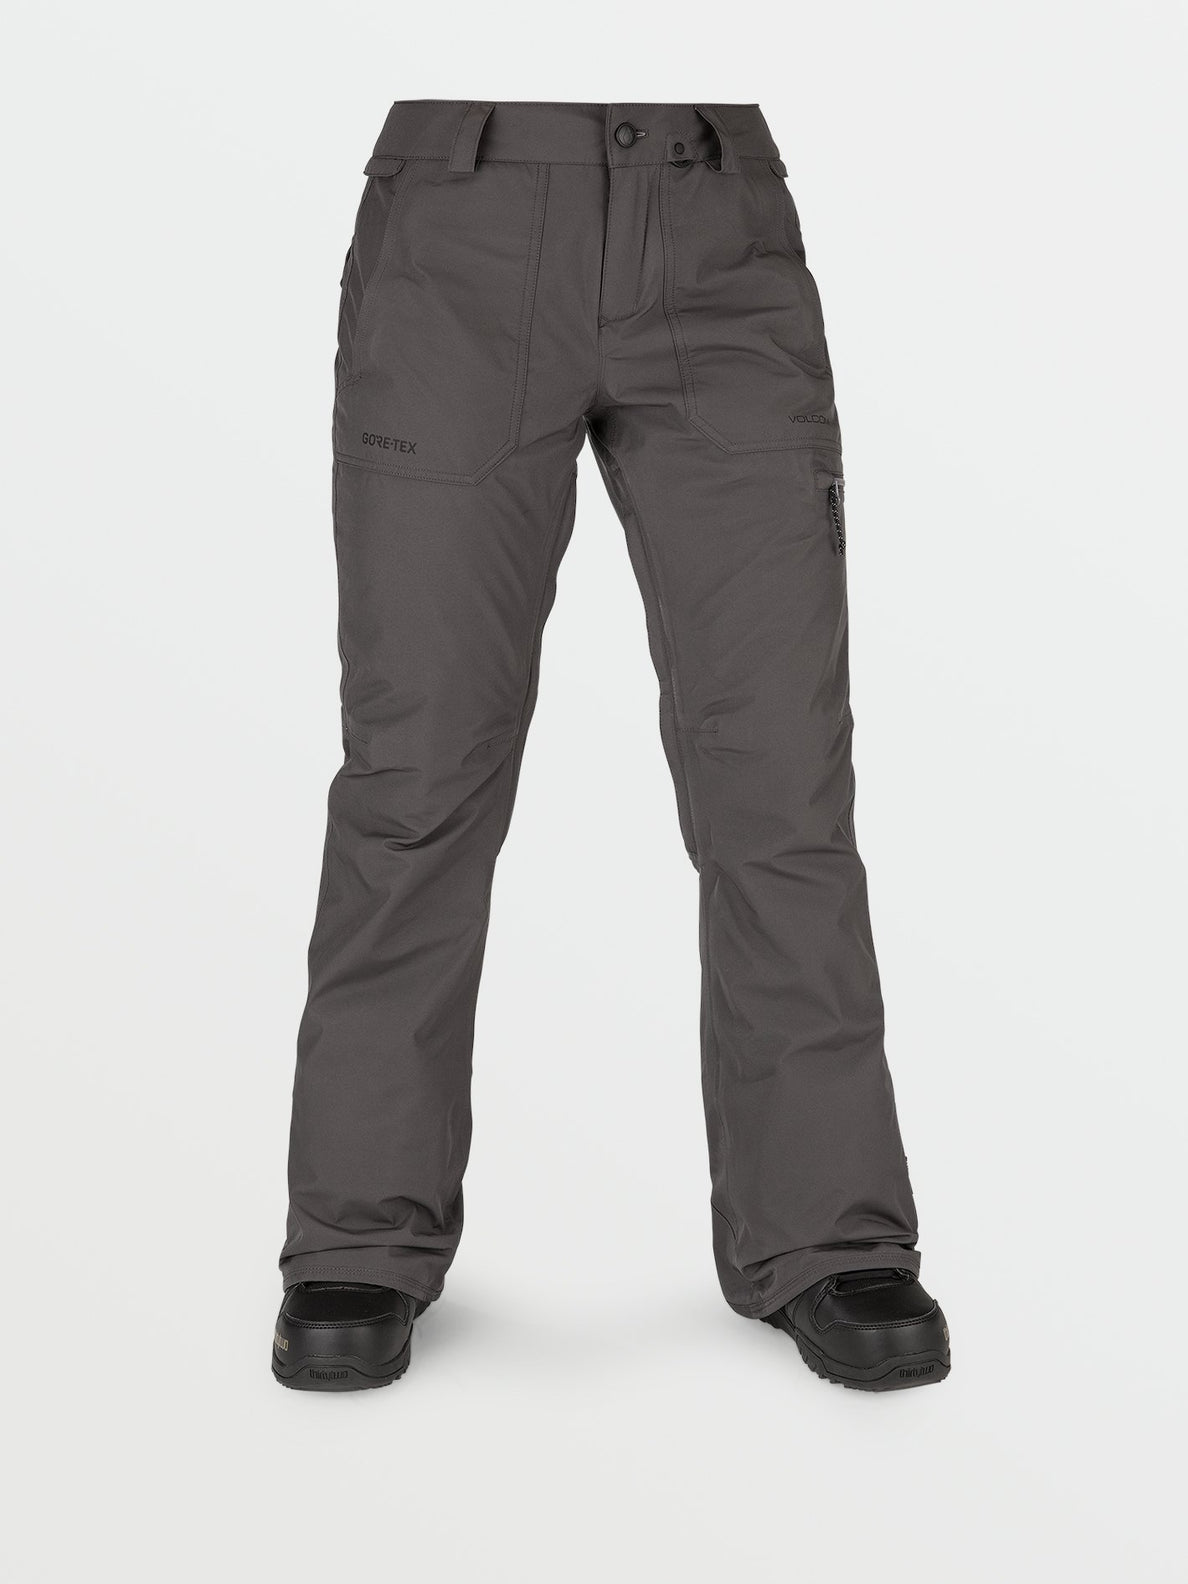 Knox Insulated Gore-Tex Trousers - DARK GREY (H1252200_DGR) [F]